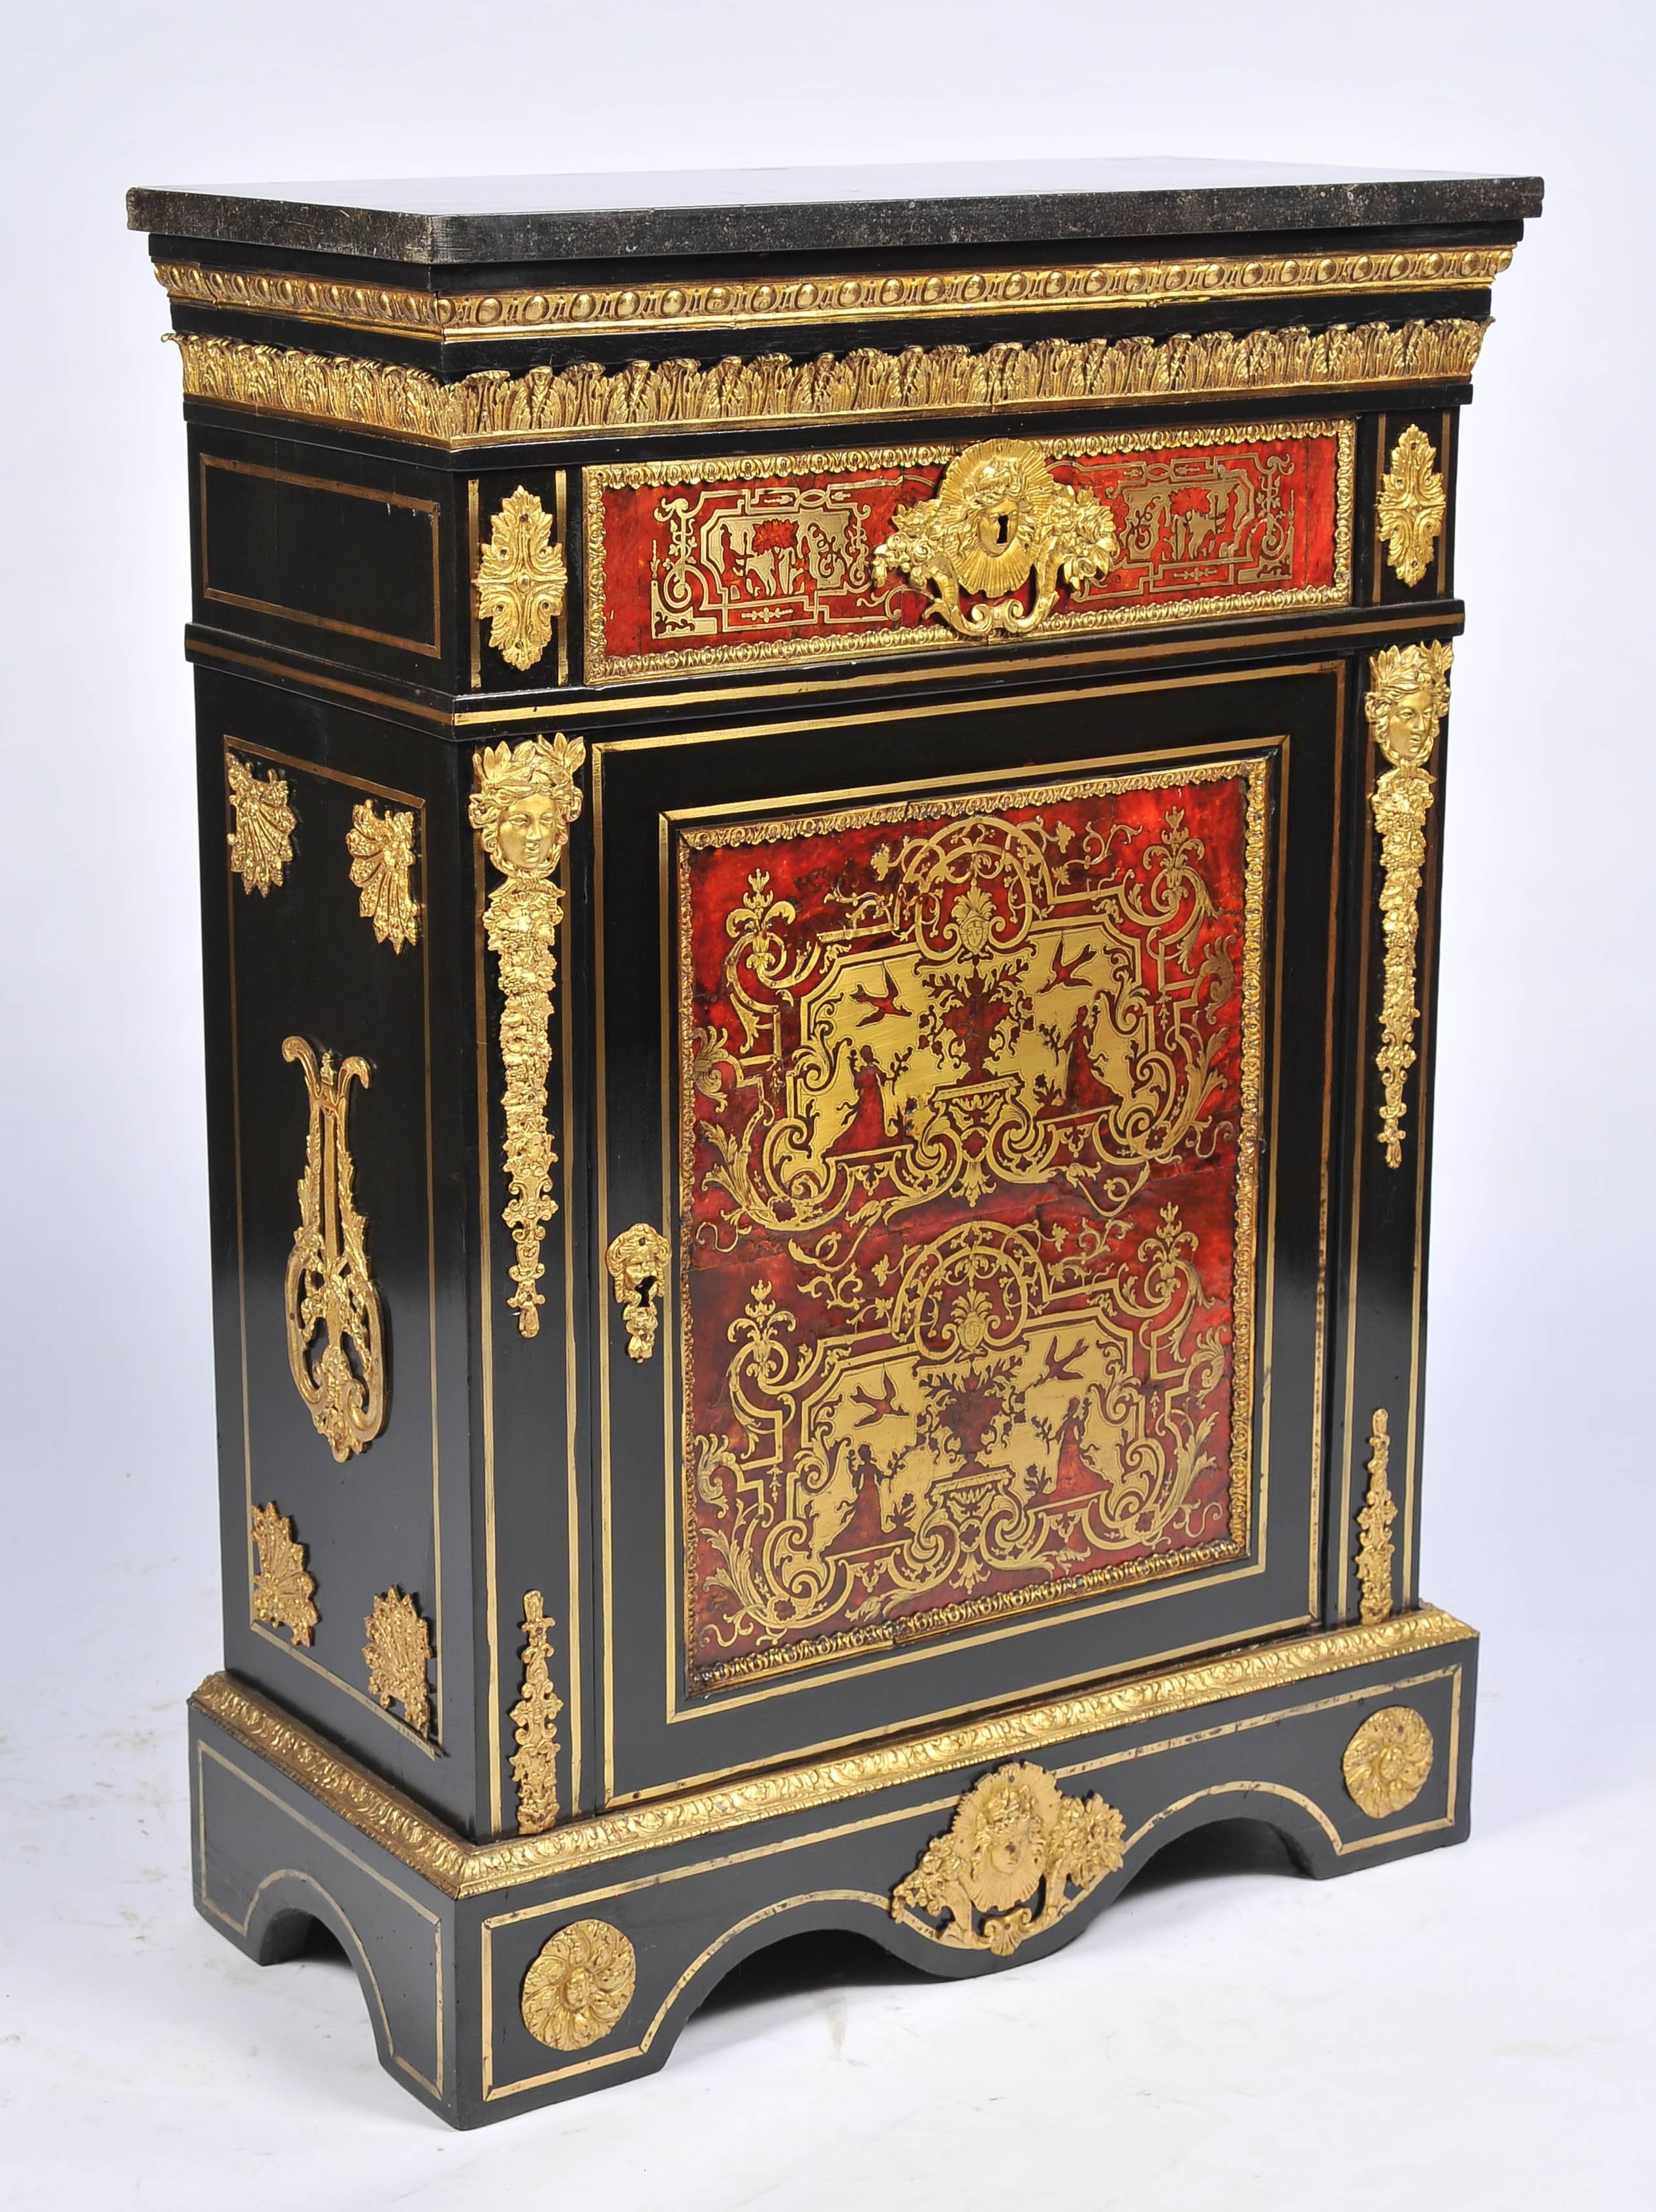 A very good quality French, 19th century Boulle side cabinet. Having its original marble top, gilded ormolu mounts. A single frieze drawer with a gilded handle. The door opens to reveal a shelf within. The brass inlaid decoration depicting birds,